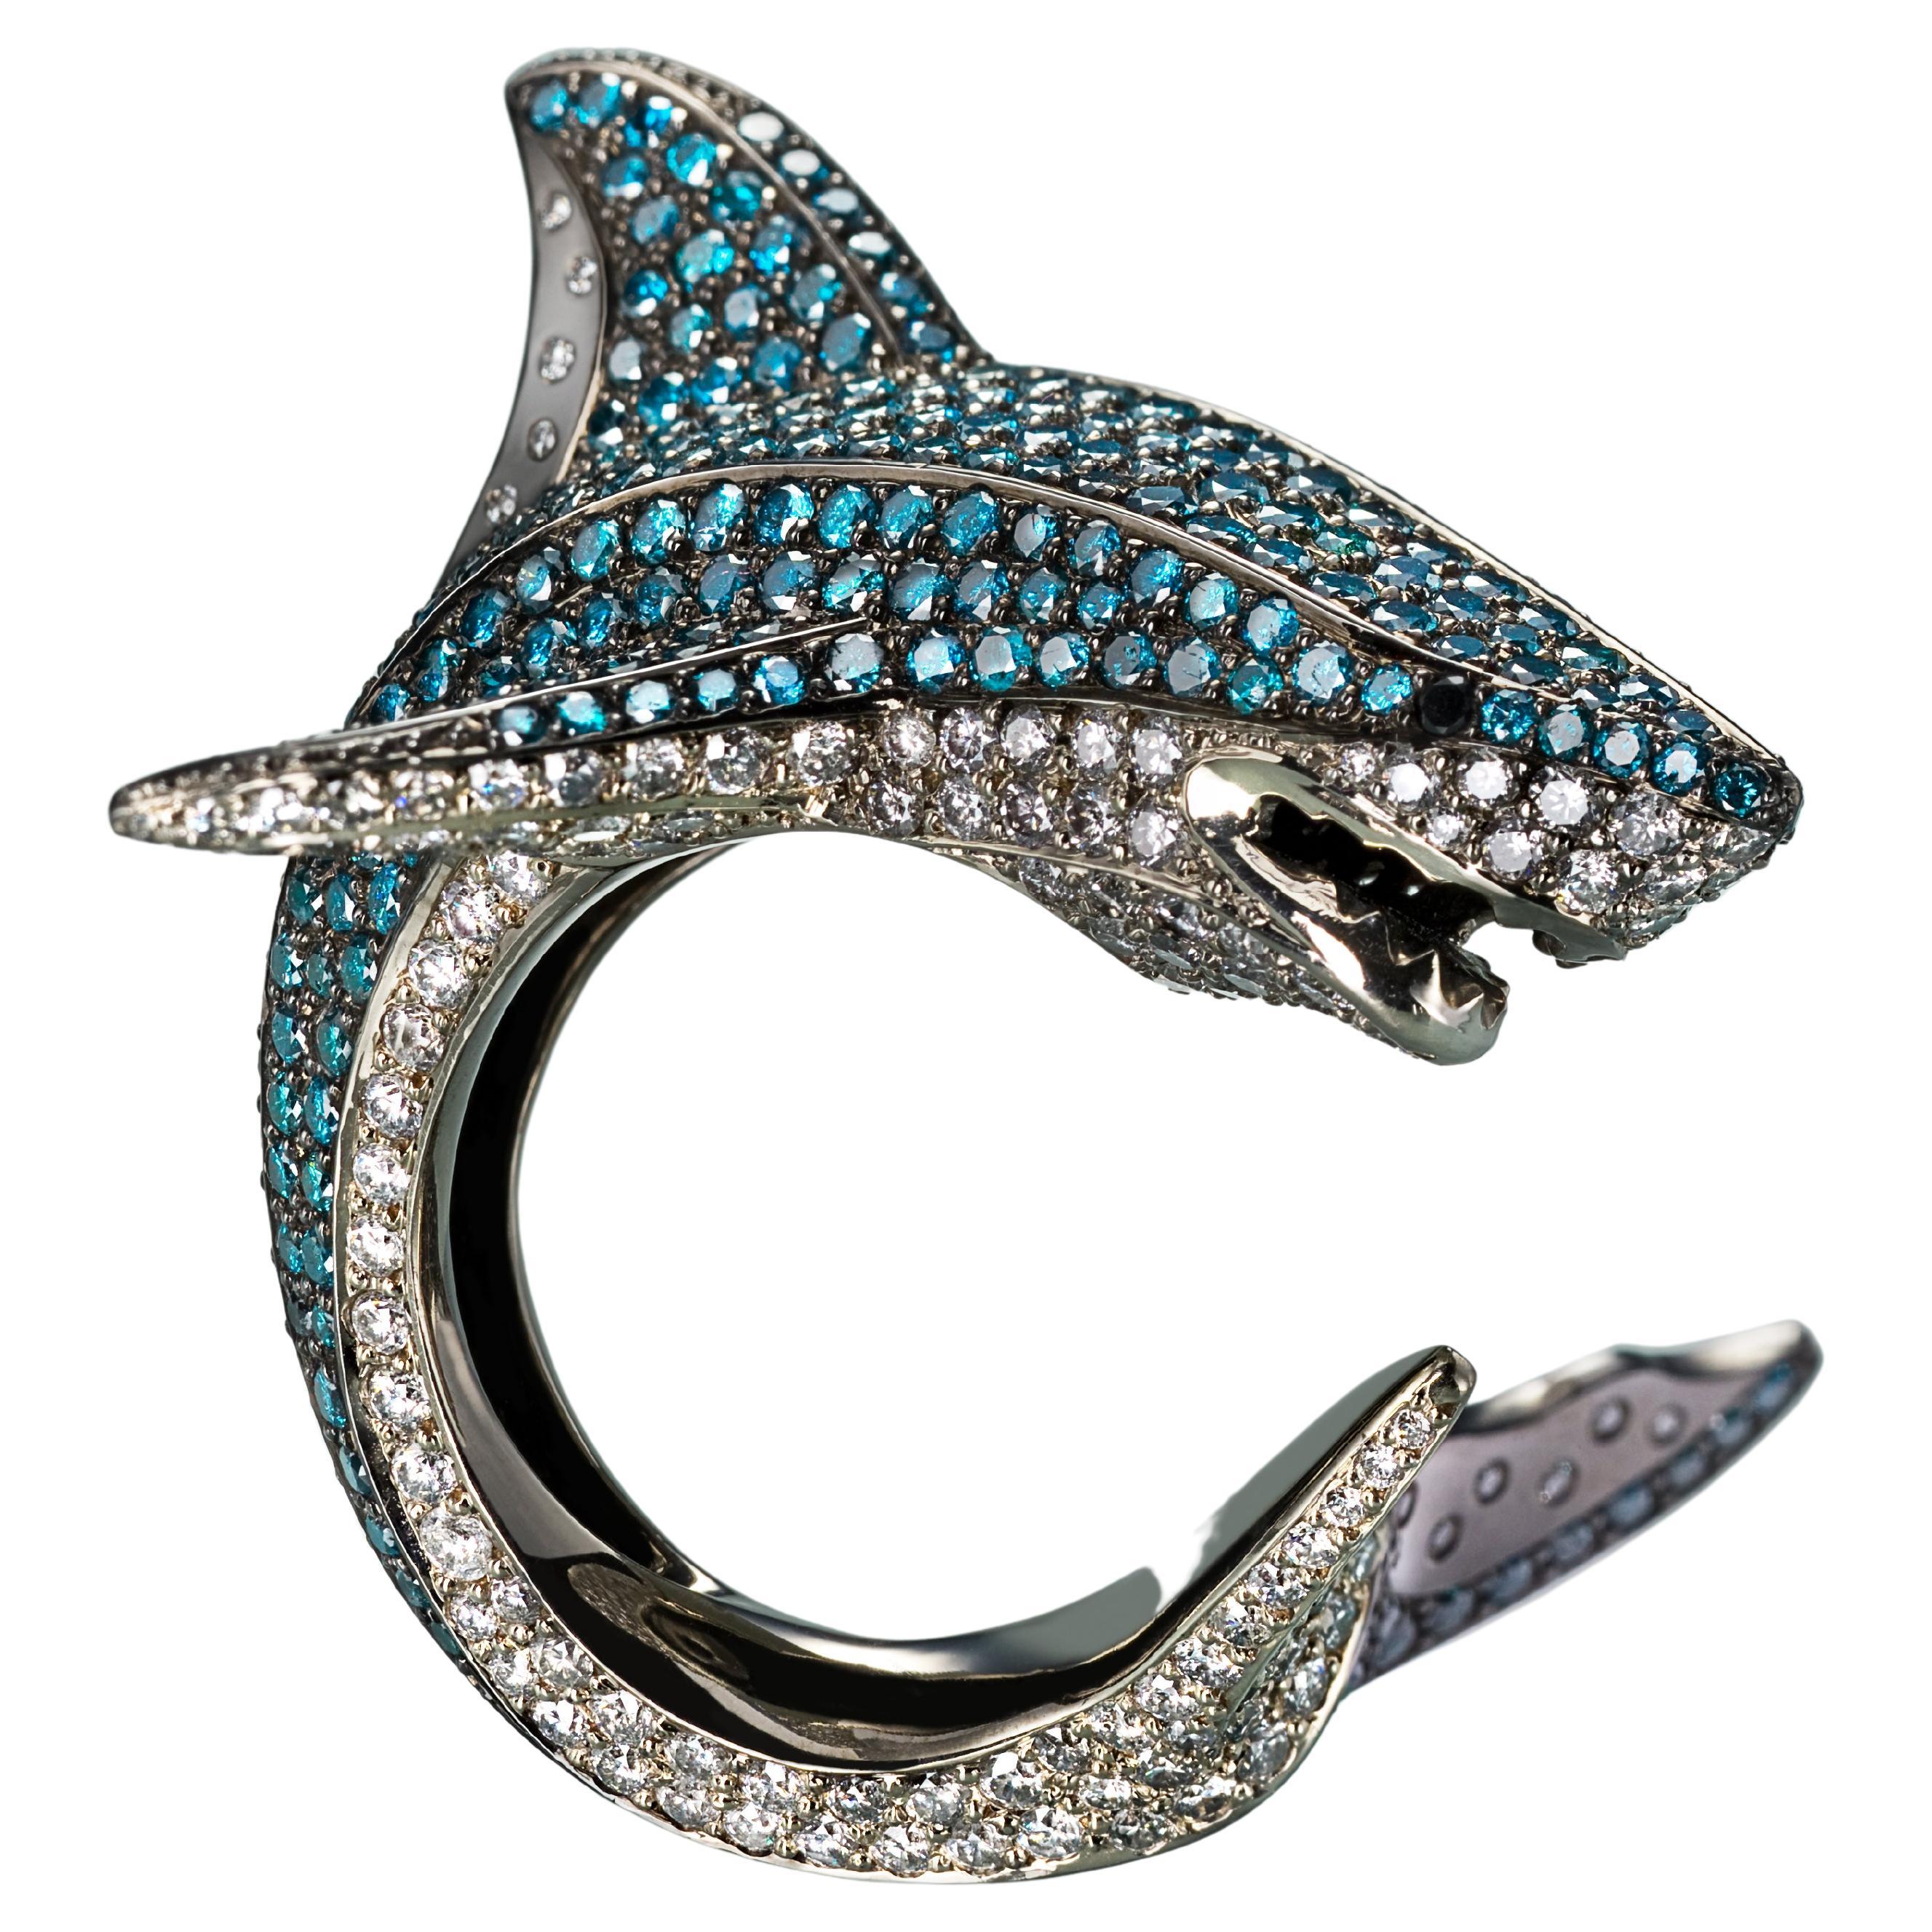 Sculptural shark ring, 18K white gold, 450 diamonds, animal jewelry For Sale